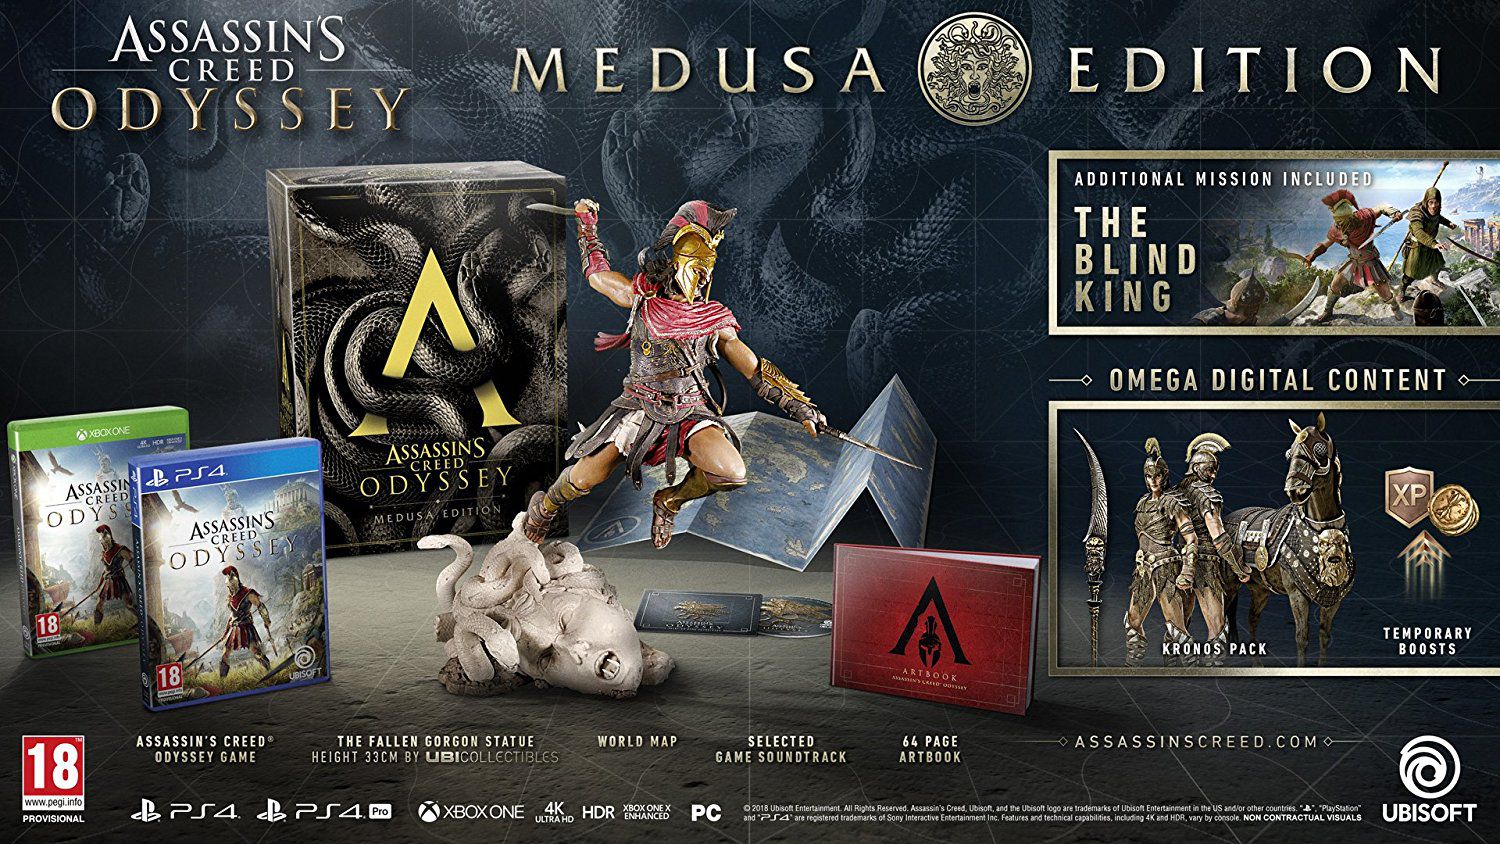  Assassins Creed Odyssey (PS4) : Toys & Games